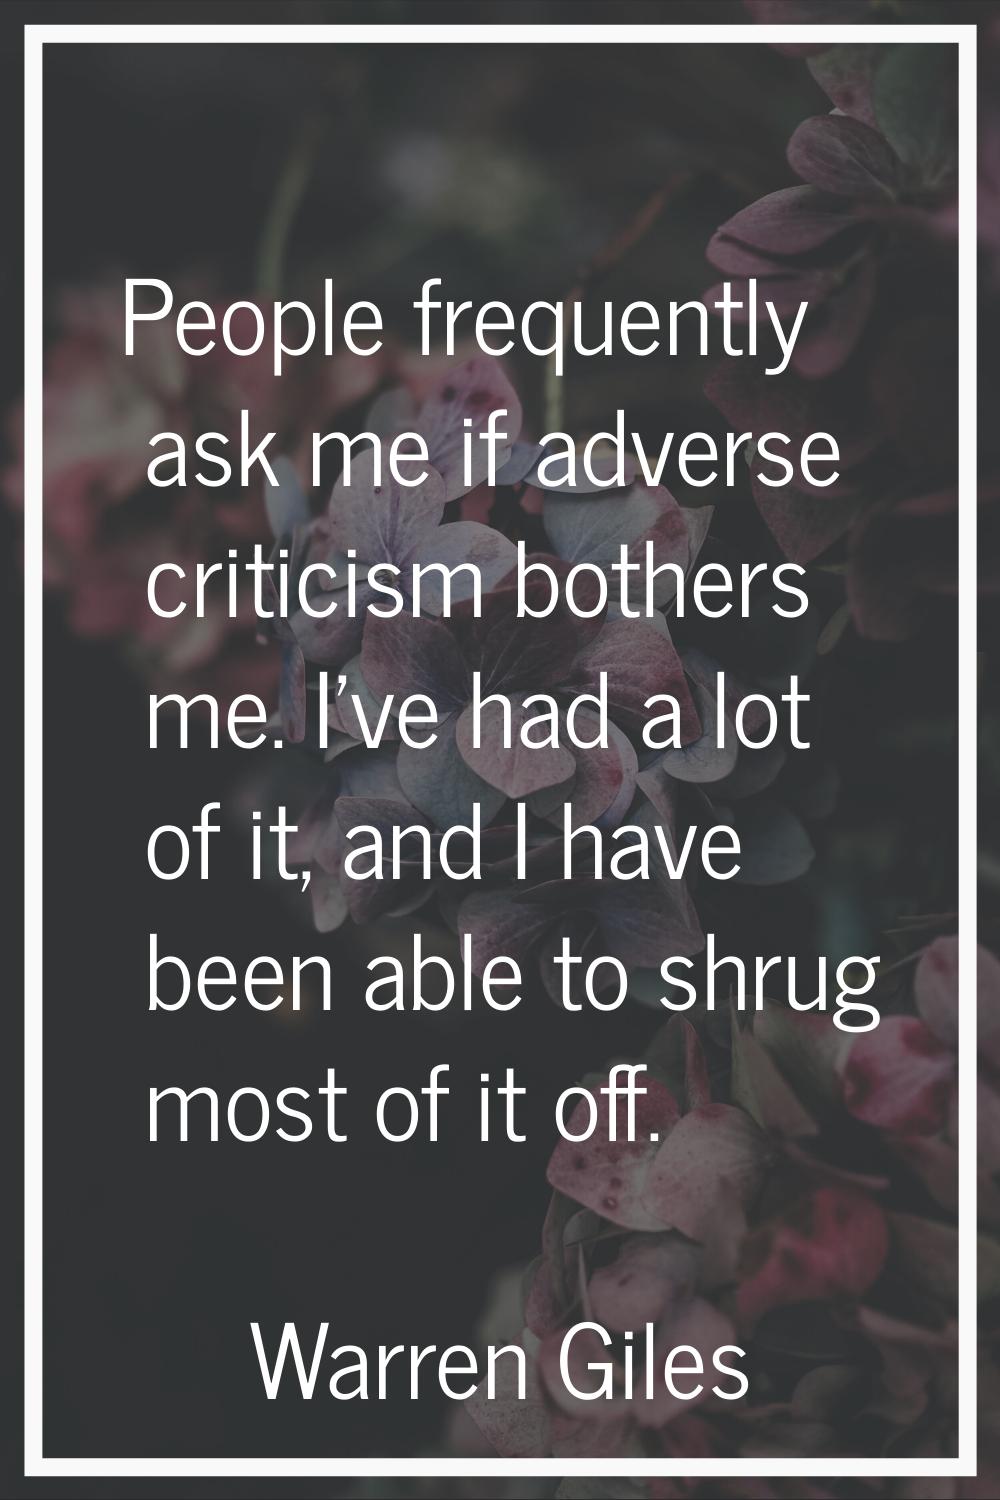 People frequently ask me if adverse criticism bothers me. I've had a lot of it, and I have been abl